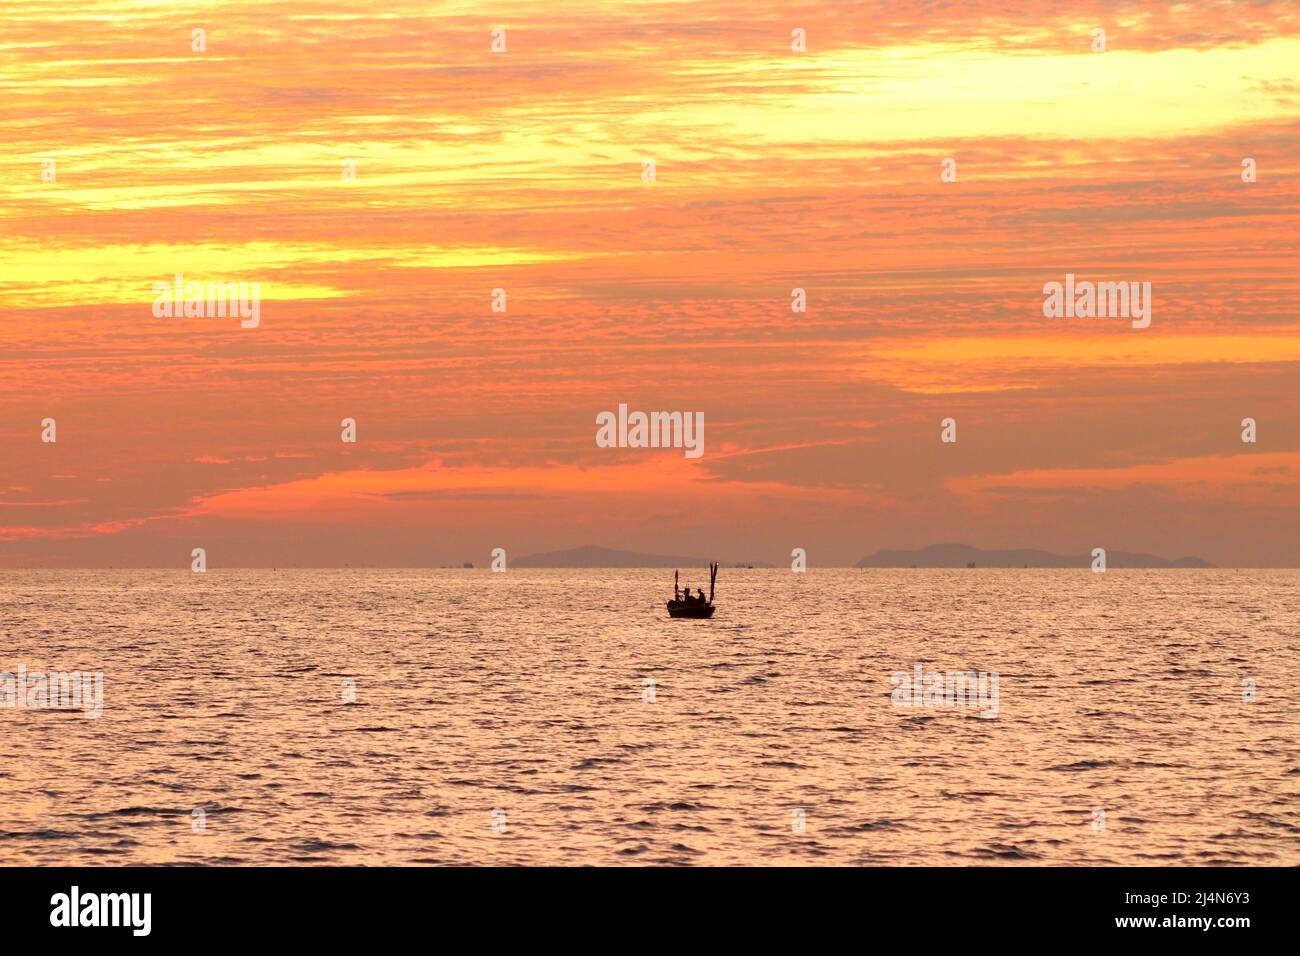 landscape view of peaceful ocean with beautiful sunset background Stock Photo